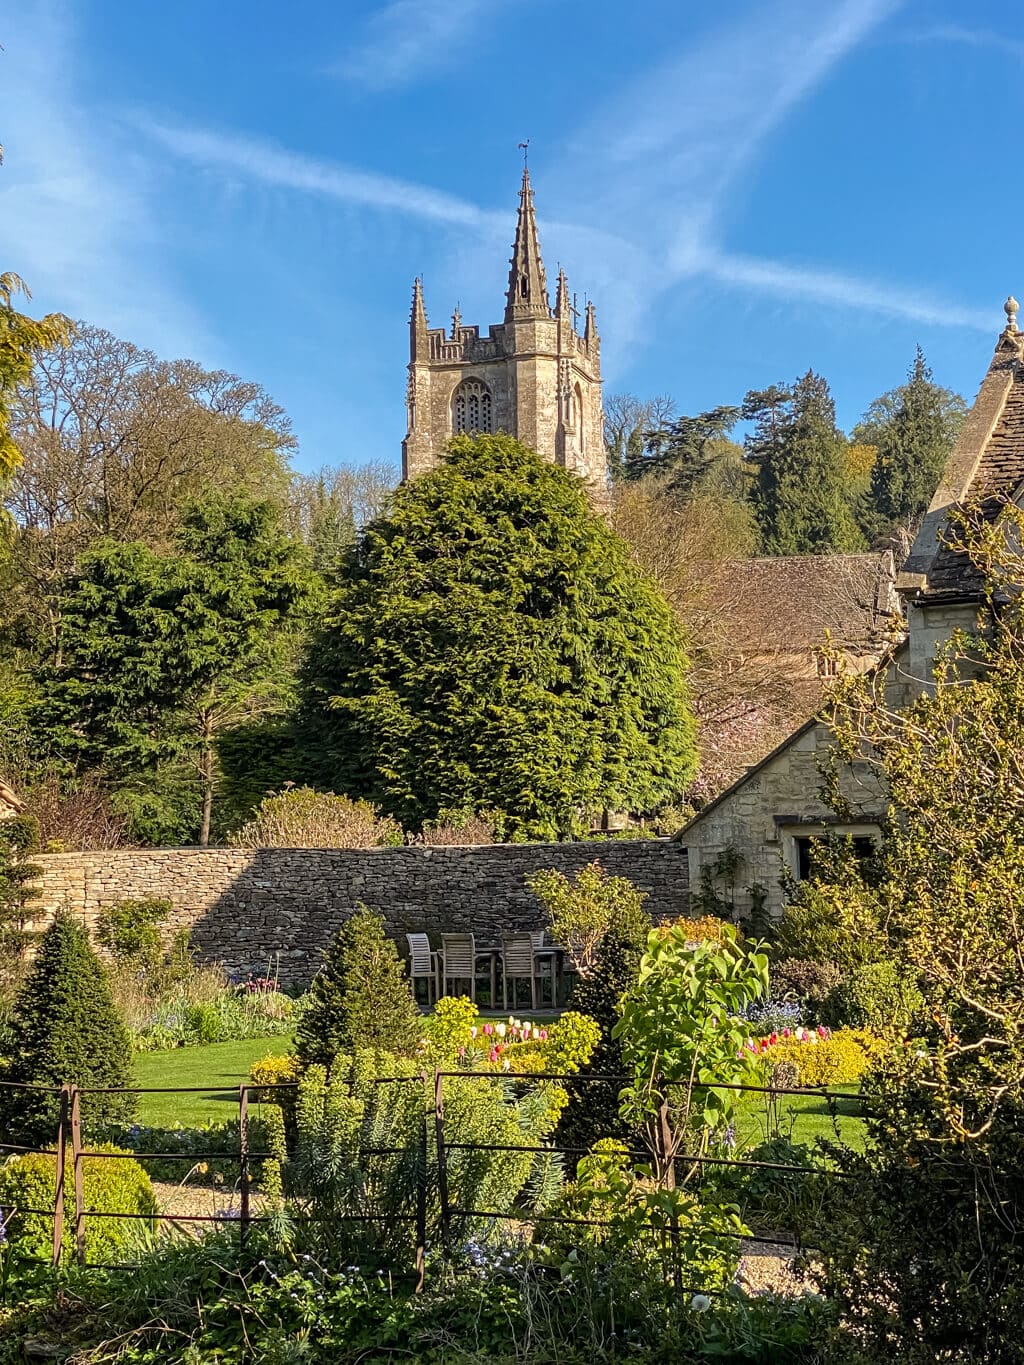 view of the tower of St Andrews church in castle combe with bushes and trees in front